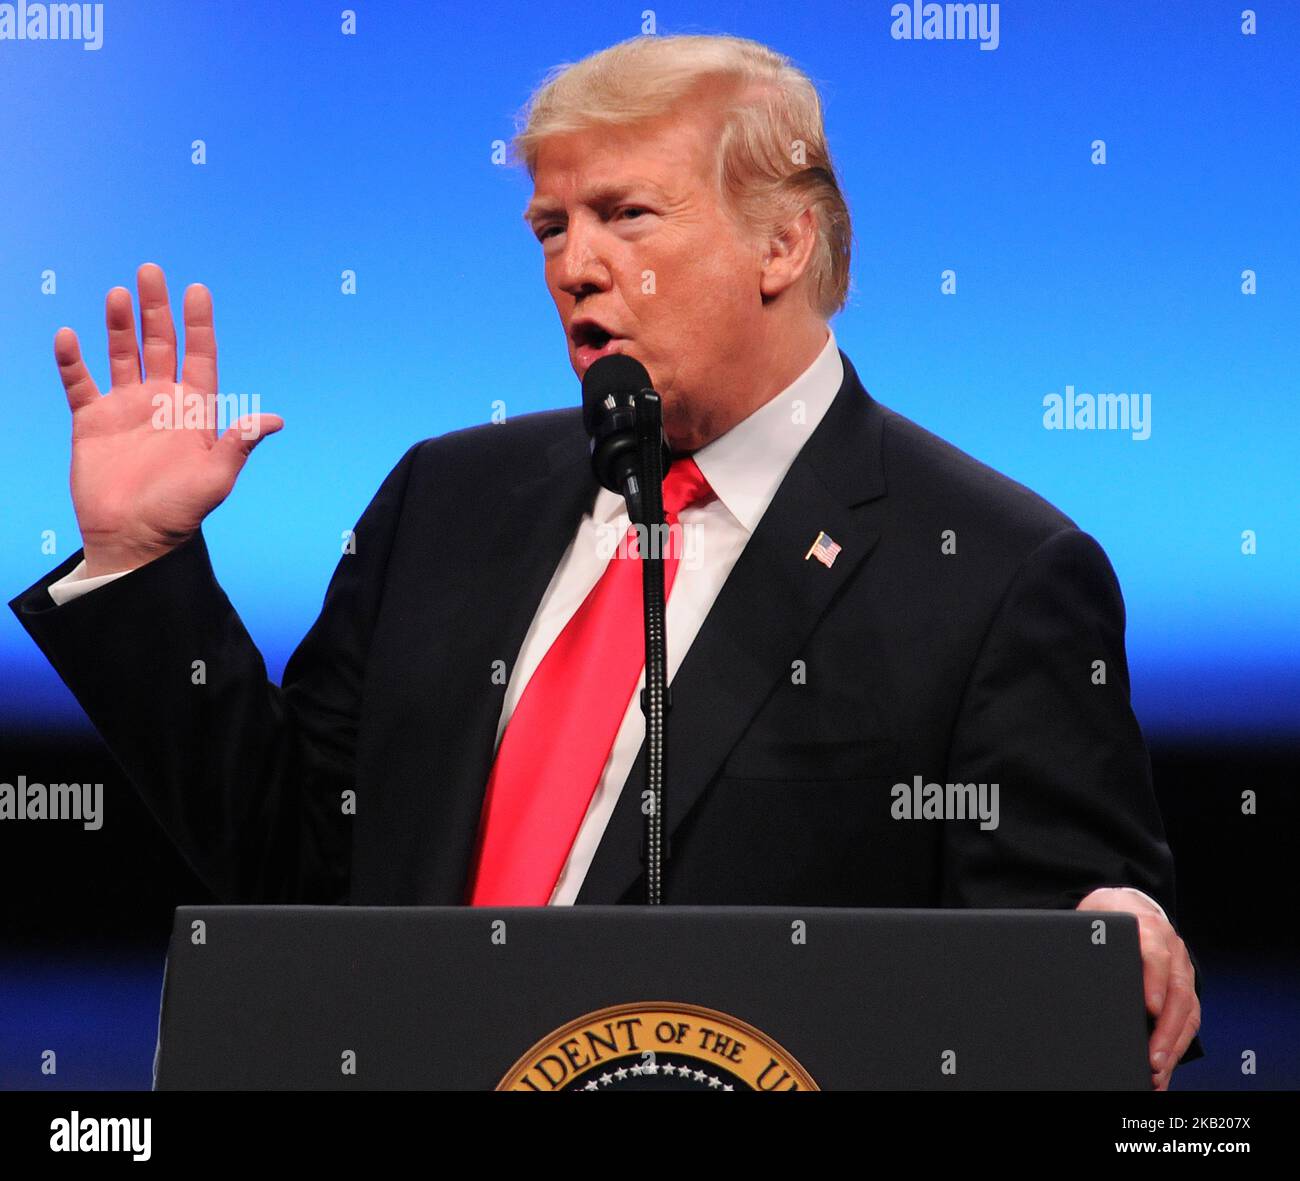 October 8, 2018 - Orlando, Florida, United States - U.S. President Donald Trump addresses attendees at the International Association of Chiefs of Police Annual Convention on October 8, 2018 at the Orange County Convention Center in Orlando, Florida. (Photo by Paul Hennessy/NurPhoto) Stock Photo